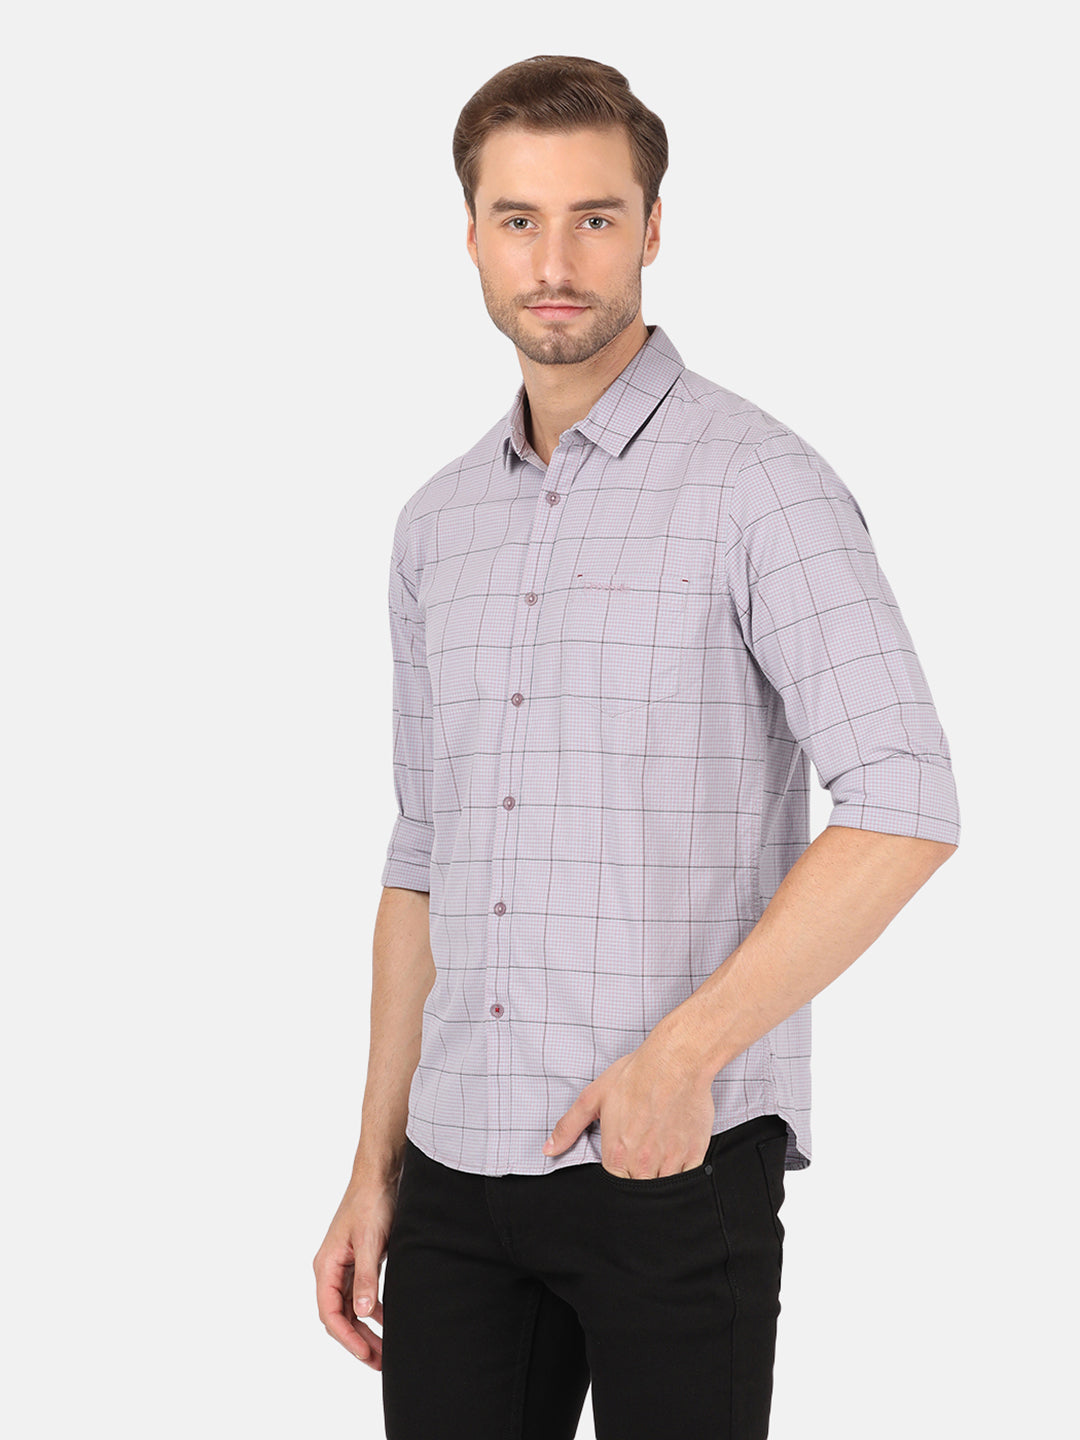 Casual Full Sleeve Slim Fit Checks Purple with Collar Shirt for Men